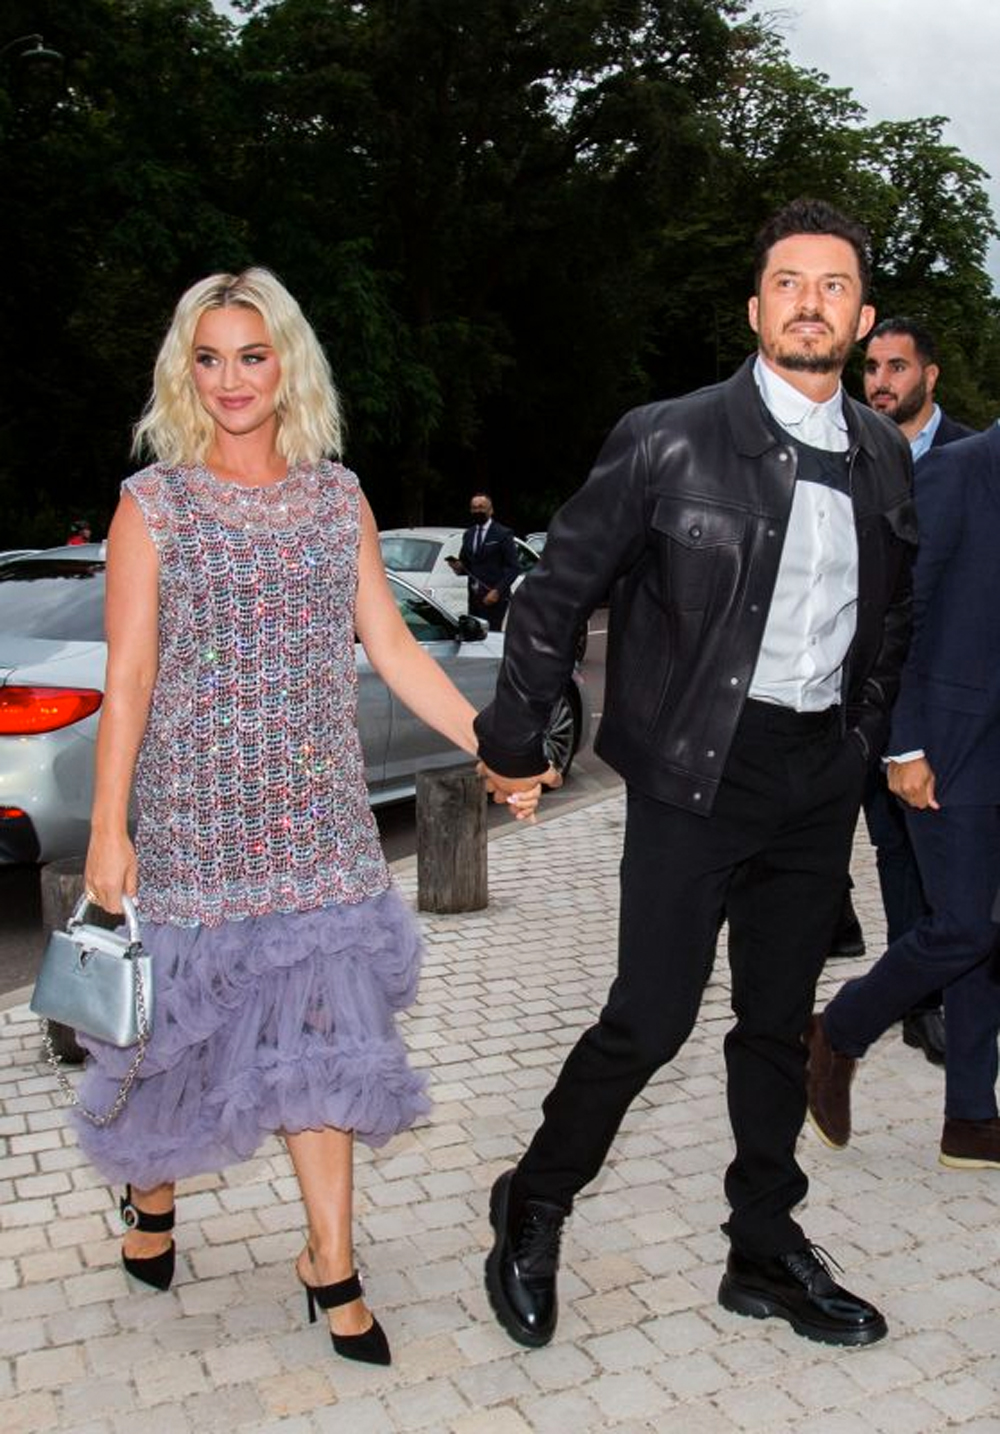 Katy Perry & Orlando Bloom look dashing at the Louis Vuitton show in Paris